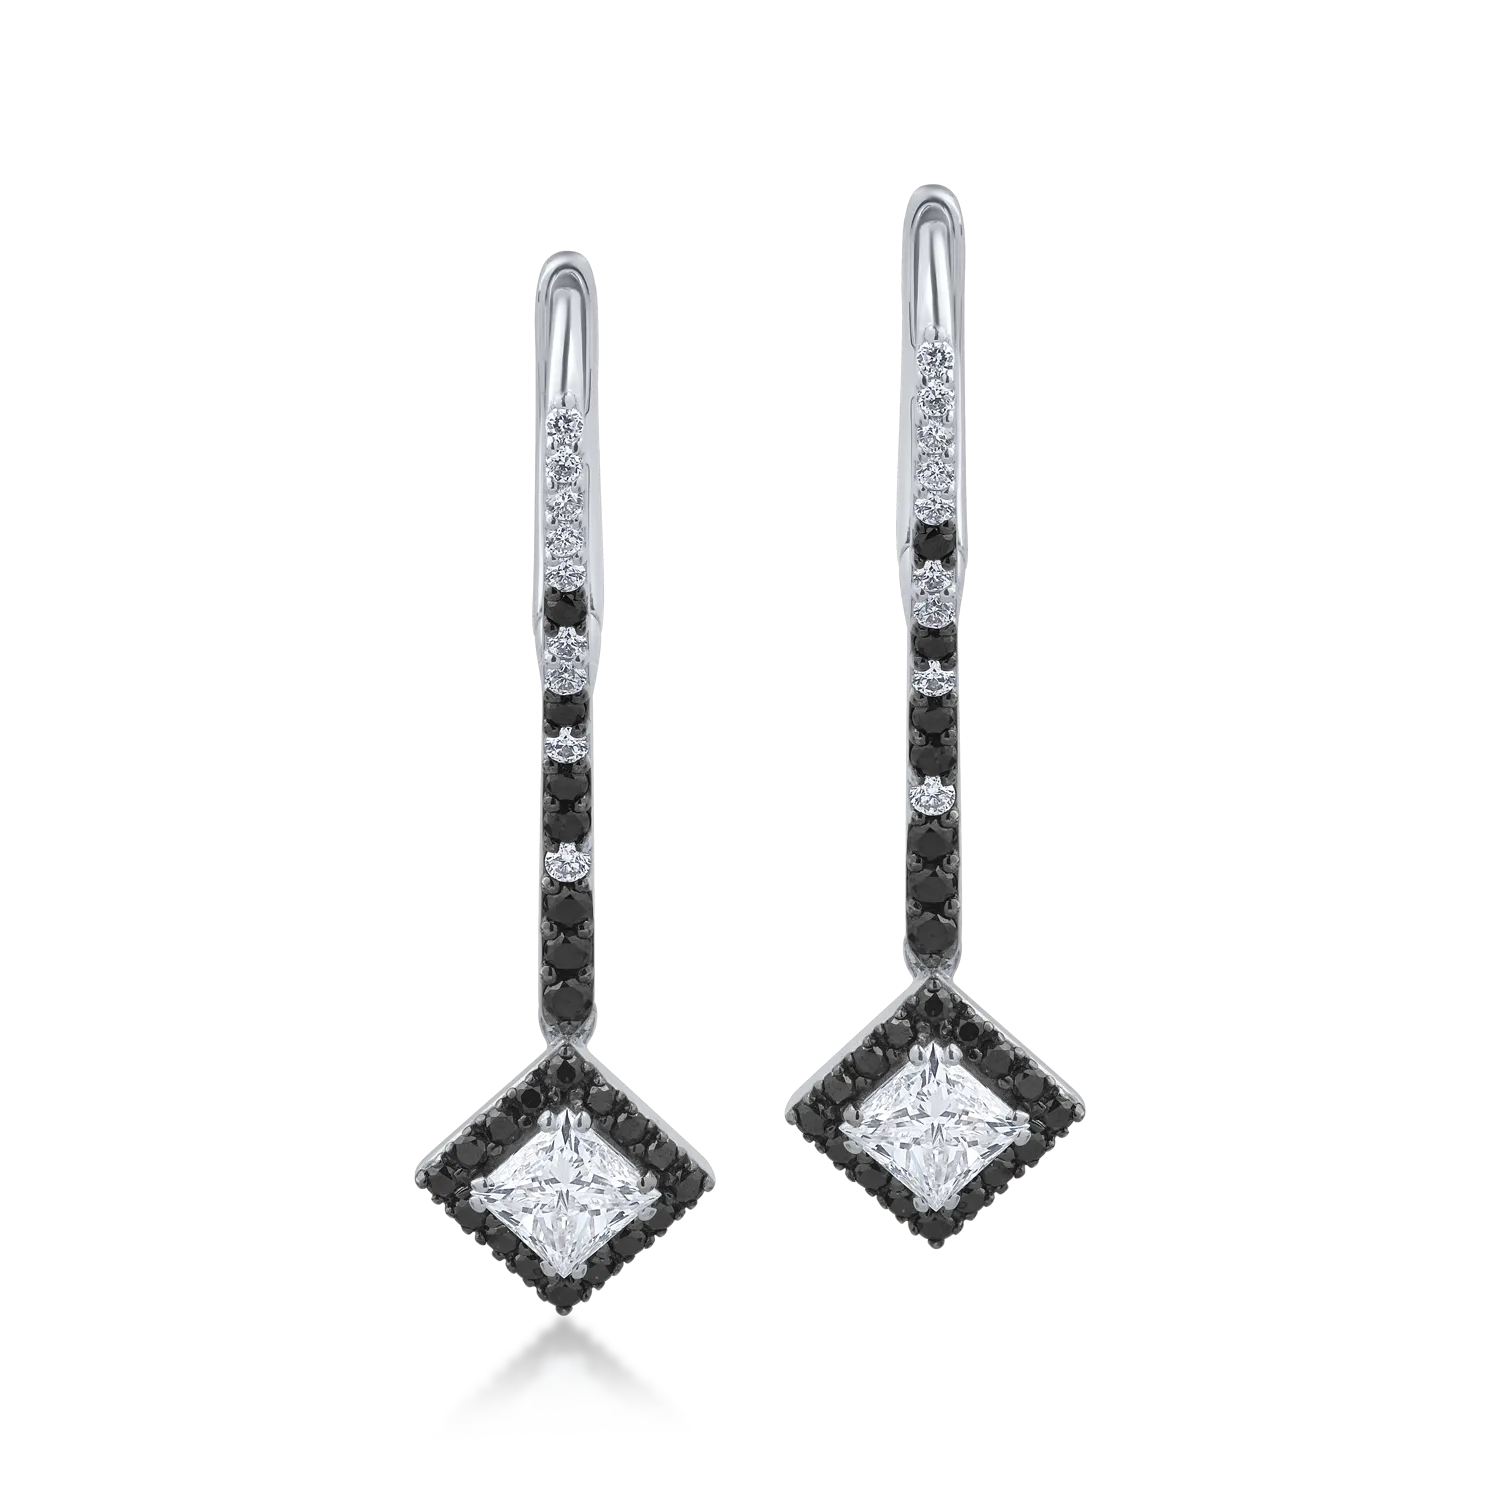 18K white gold earrings with 1.23ct clear diamonds and 0.48ct black diamonds